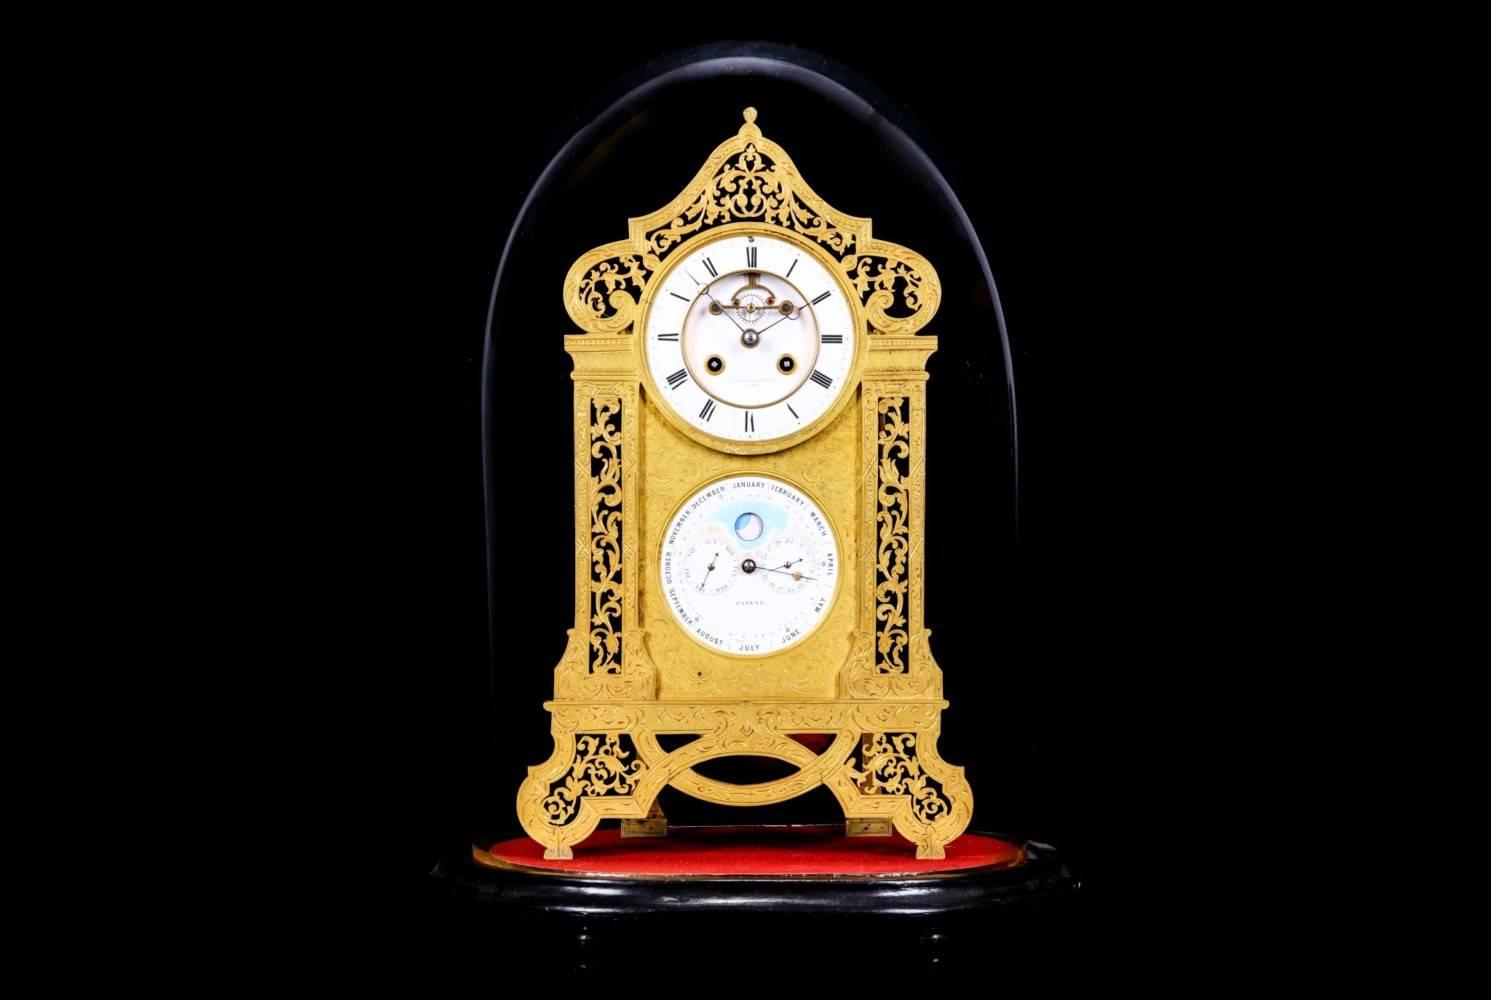 A fine mid-19th century French gilt bronze mantel clock with perpetual calendar, equation of time and Moonphase by Brocot & Delettrez, Paris.
The engraved and pierced case modelled as a pair of columns surmounted by a scrolling dome, raised on an